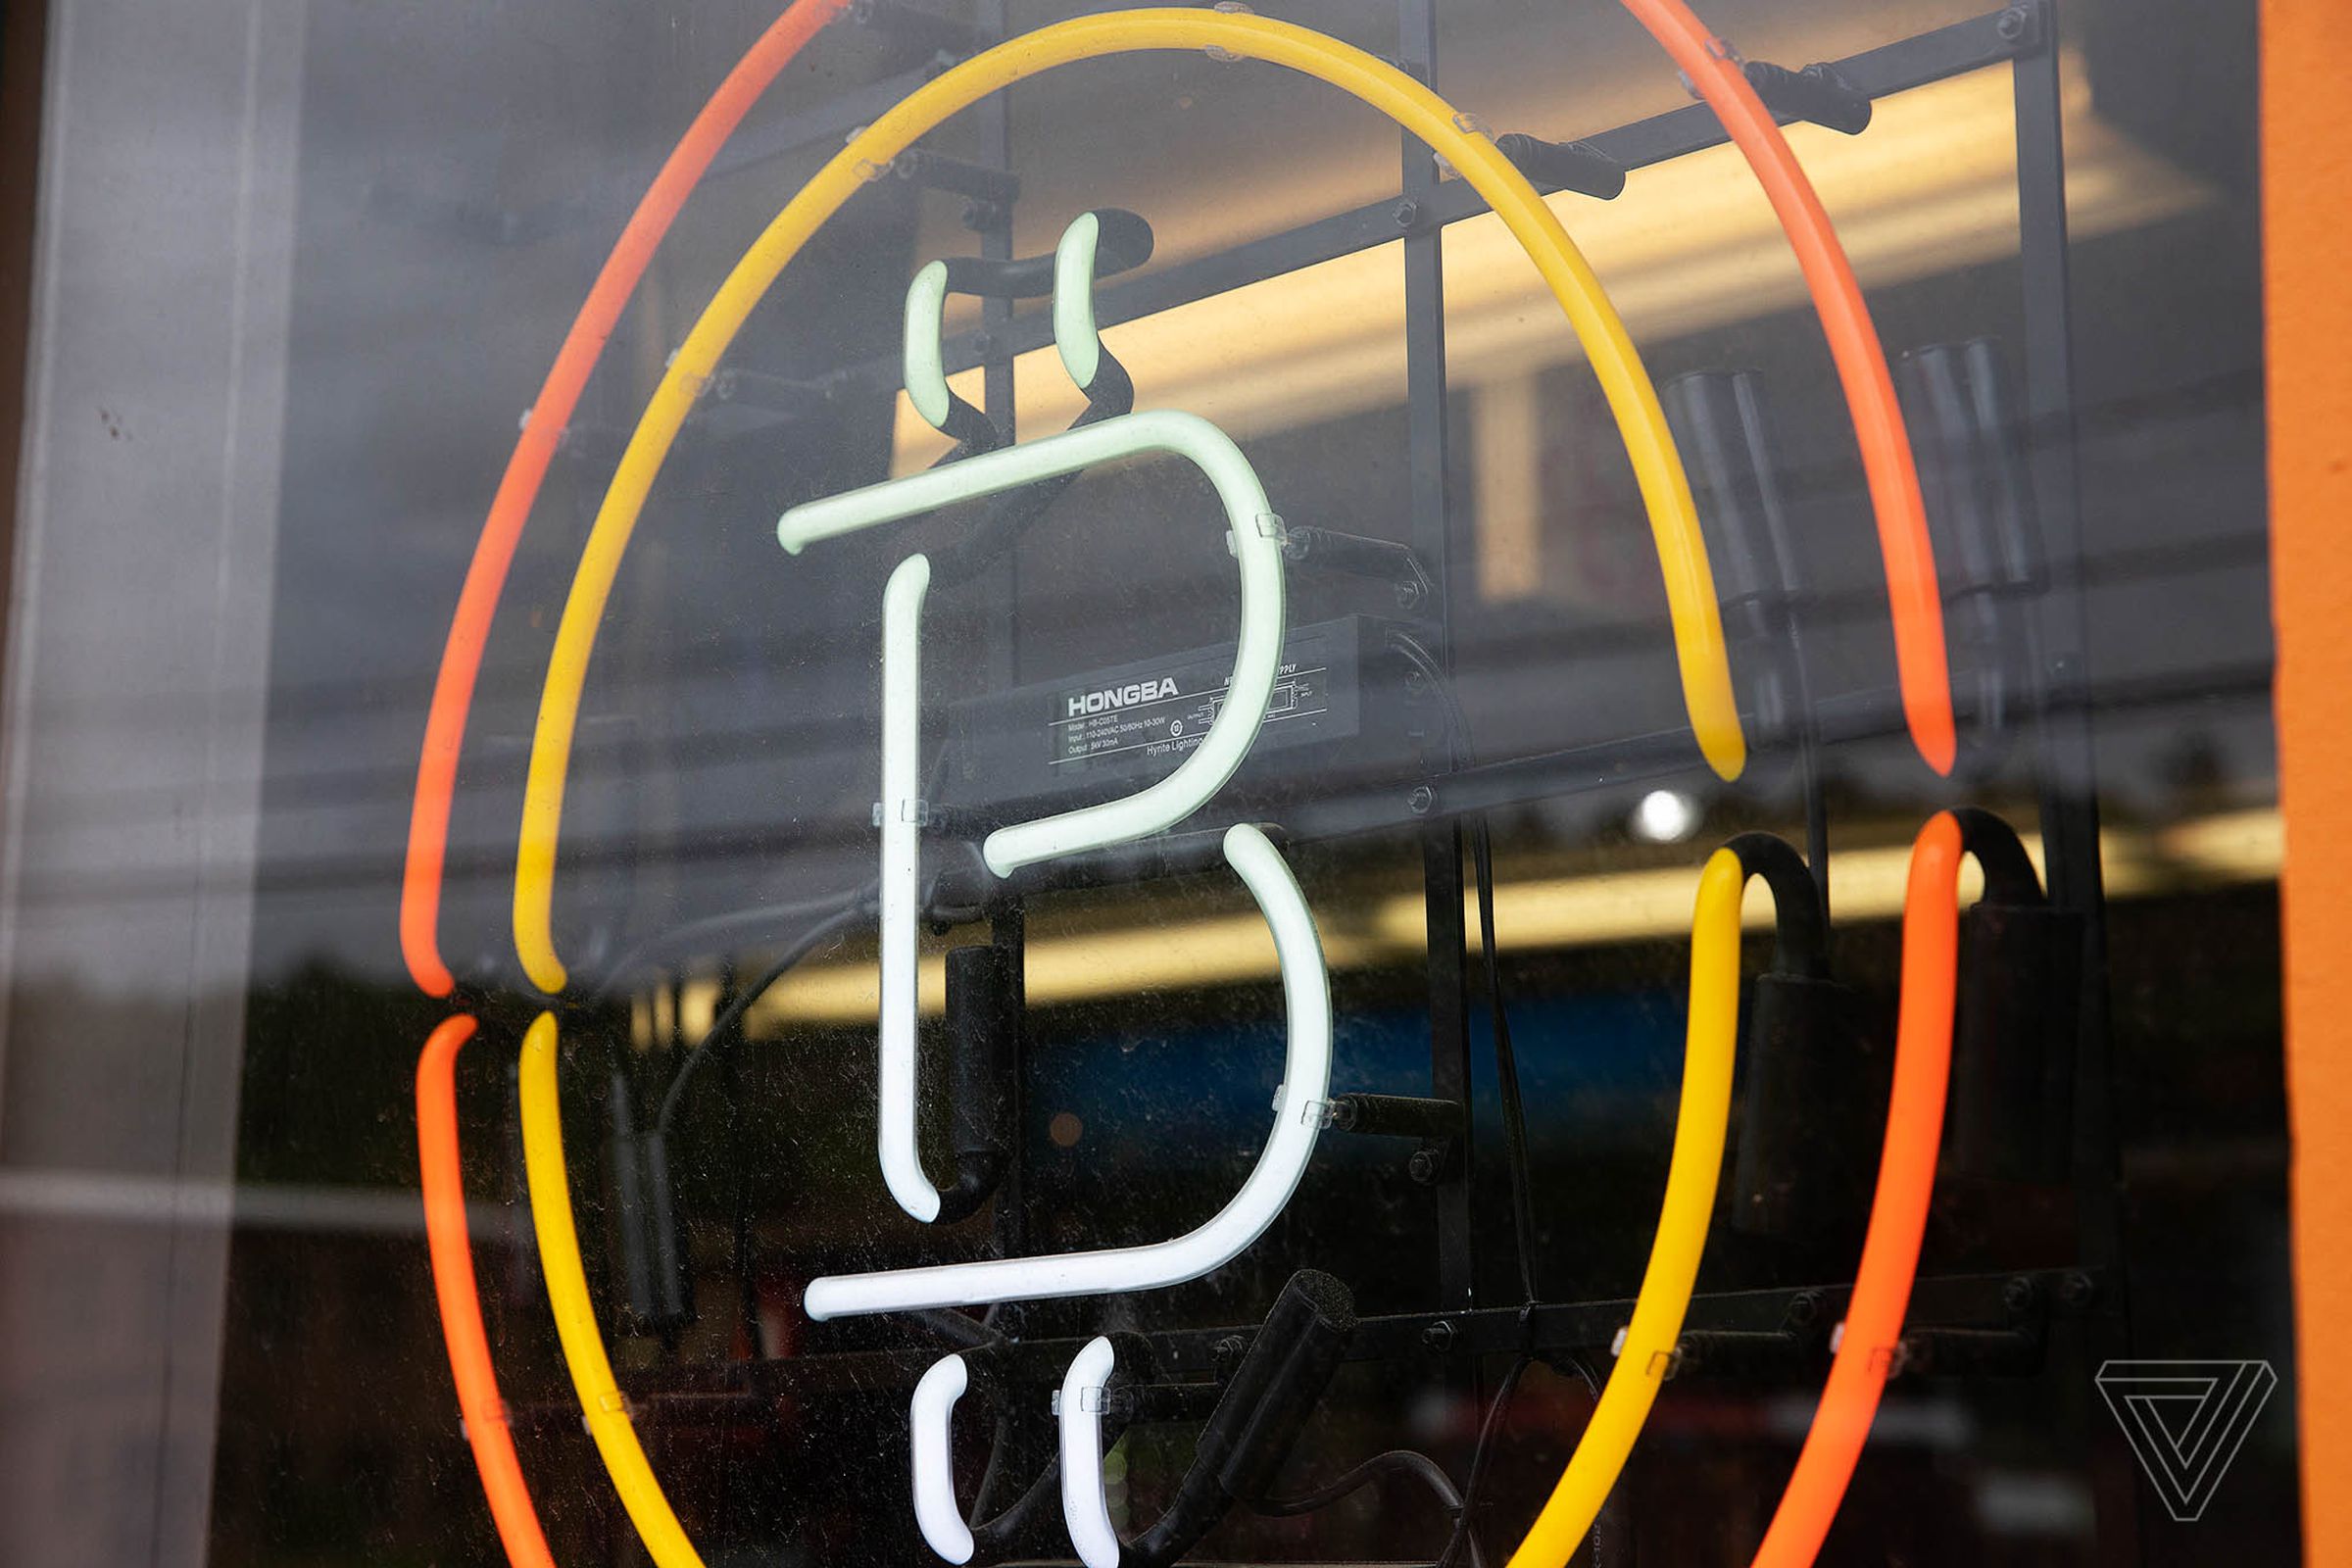 An image of the Bitcoin logo in a window